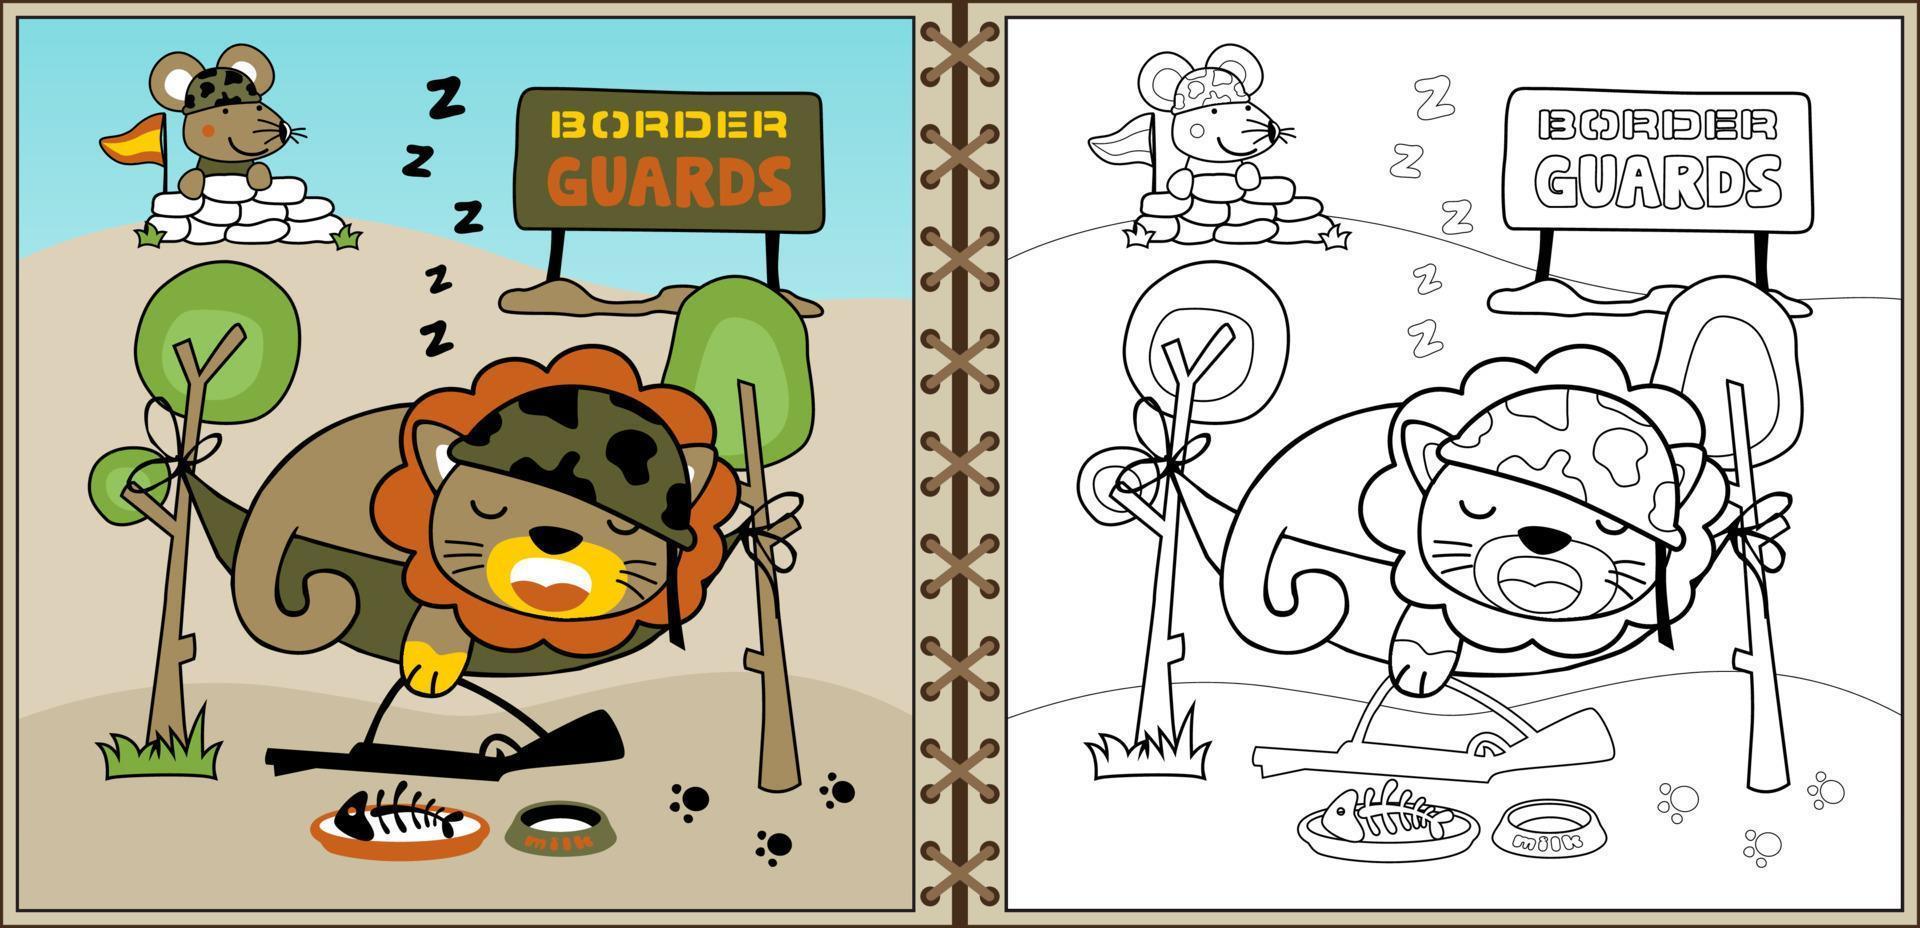 funny animals soldiers cartoon vector in military equipment, military elements, coloring book or page